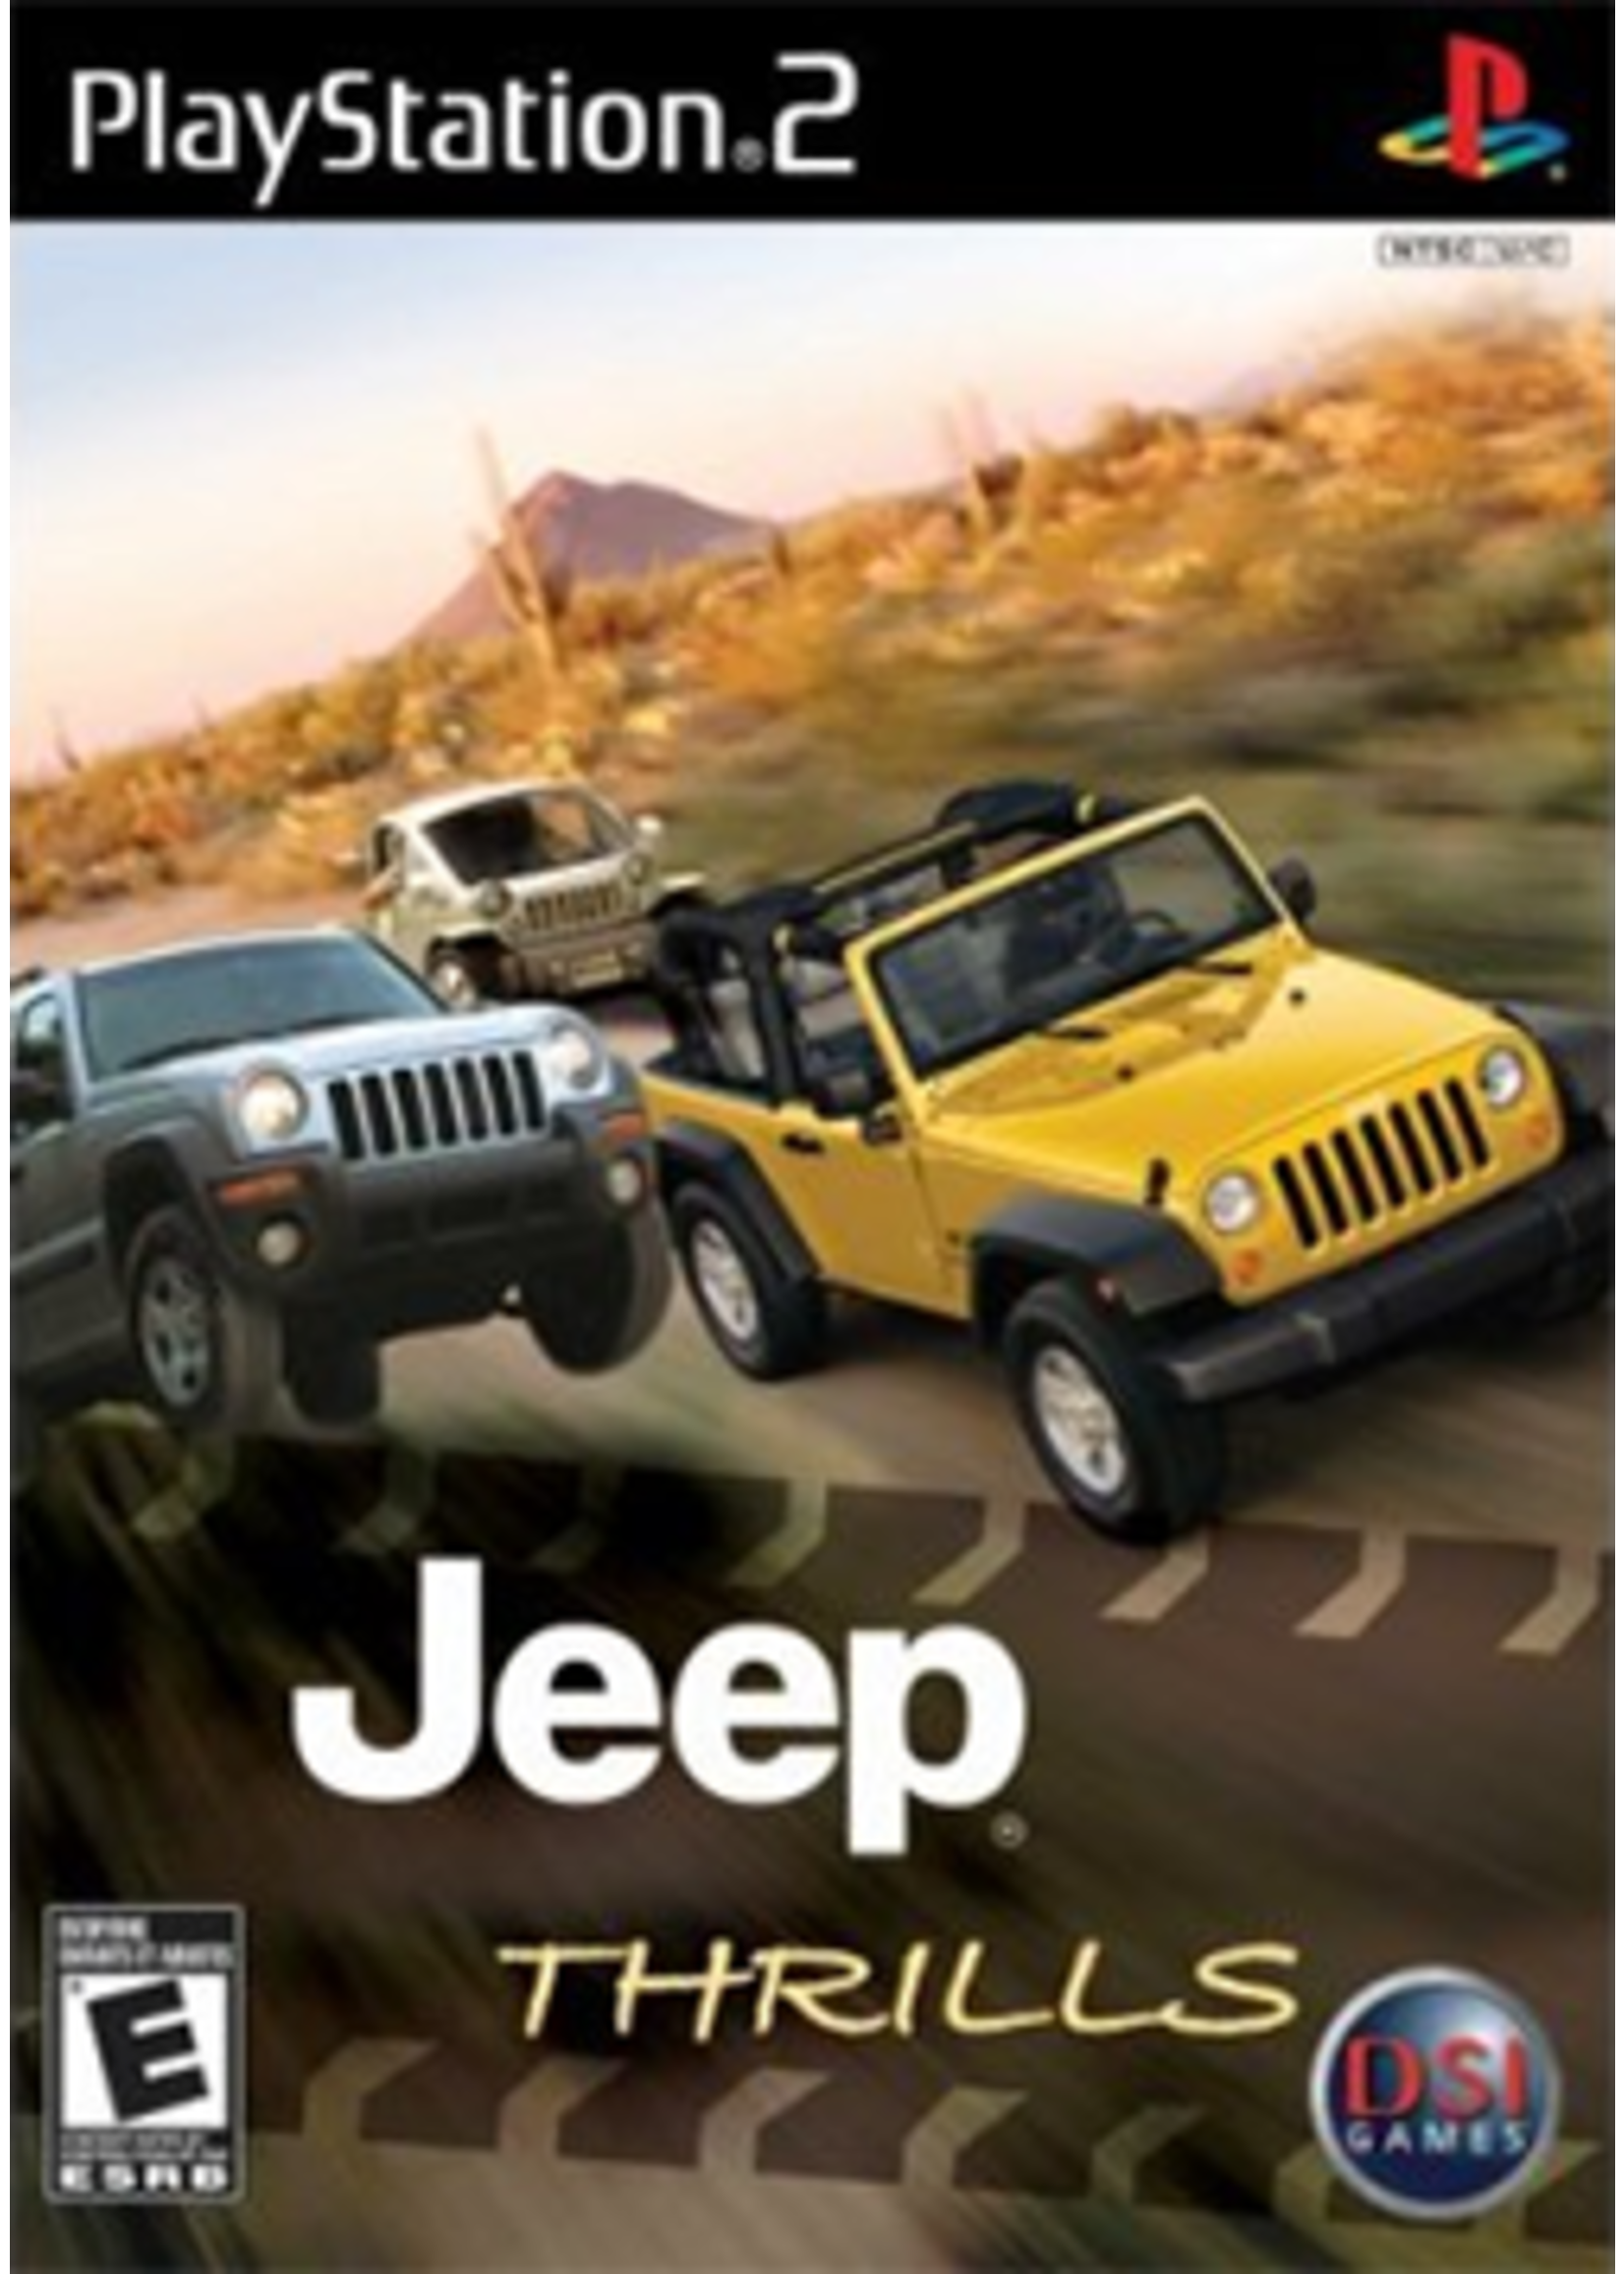 Sony Playstation 2 (PS2) Jeep Thrills